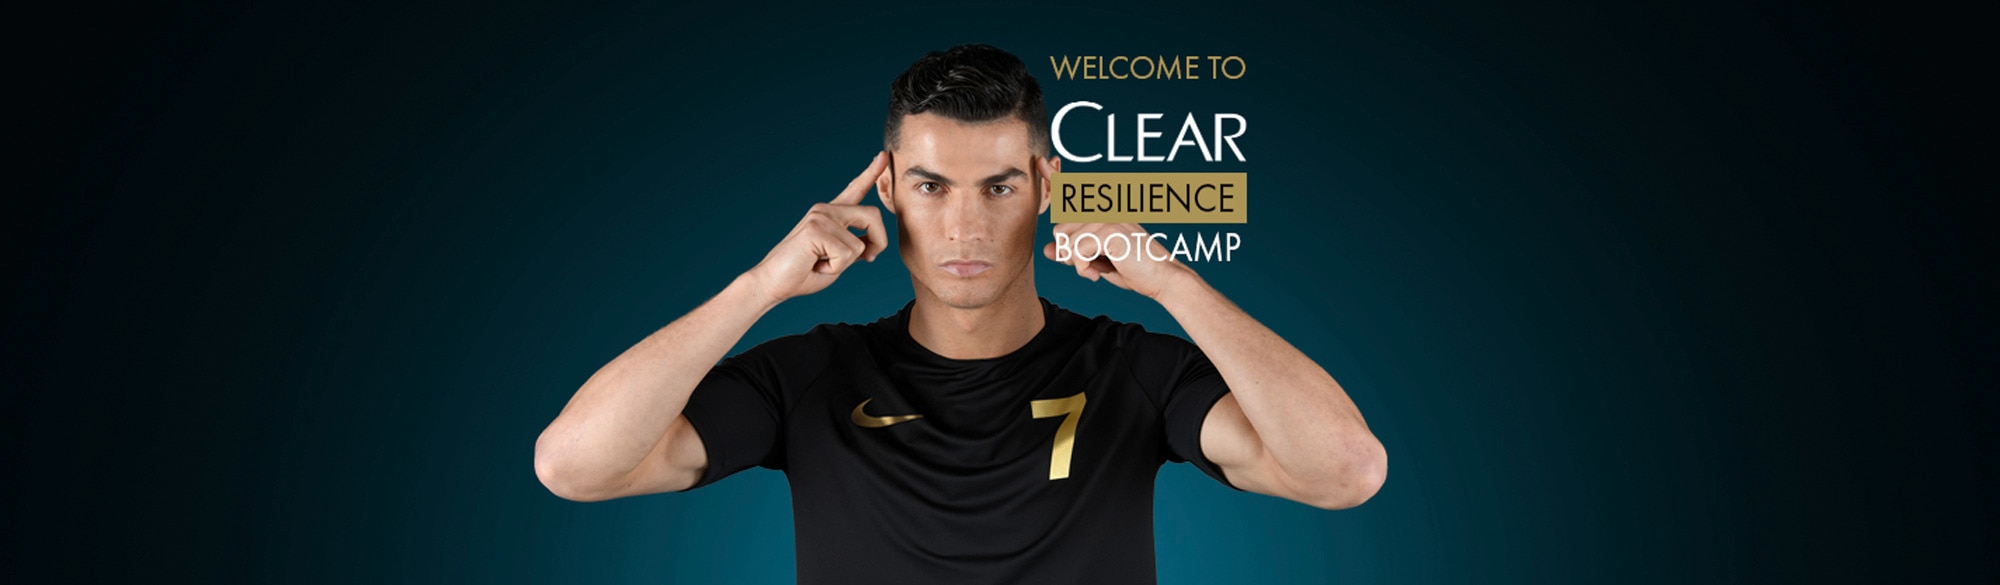 Storie di Resilienza | CLEAR